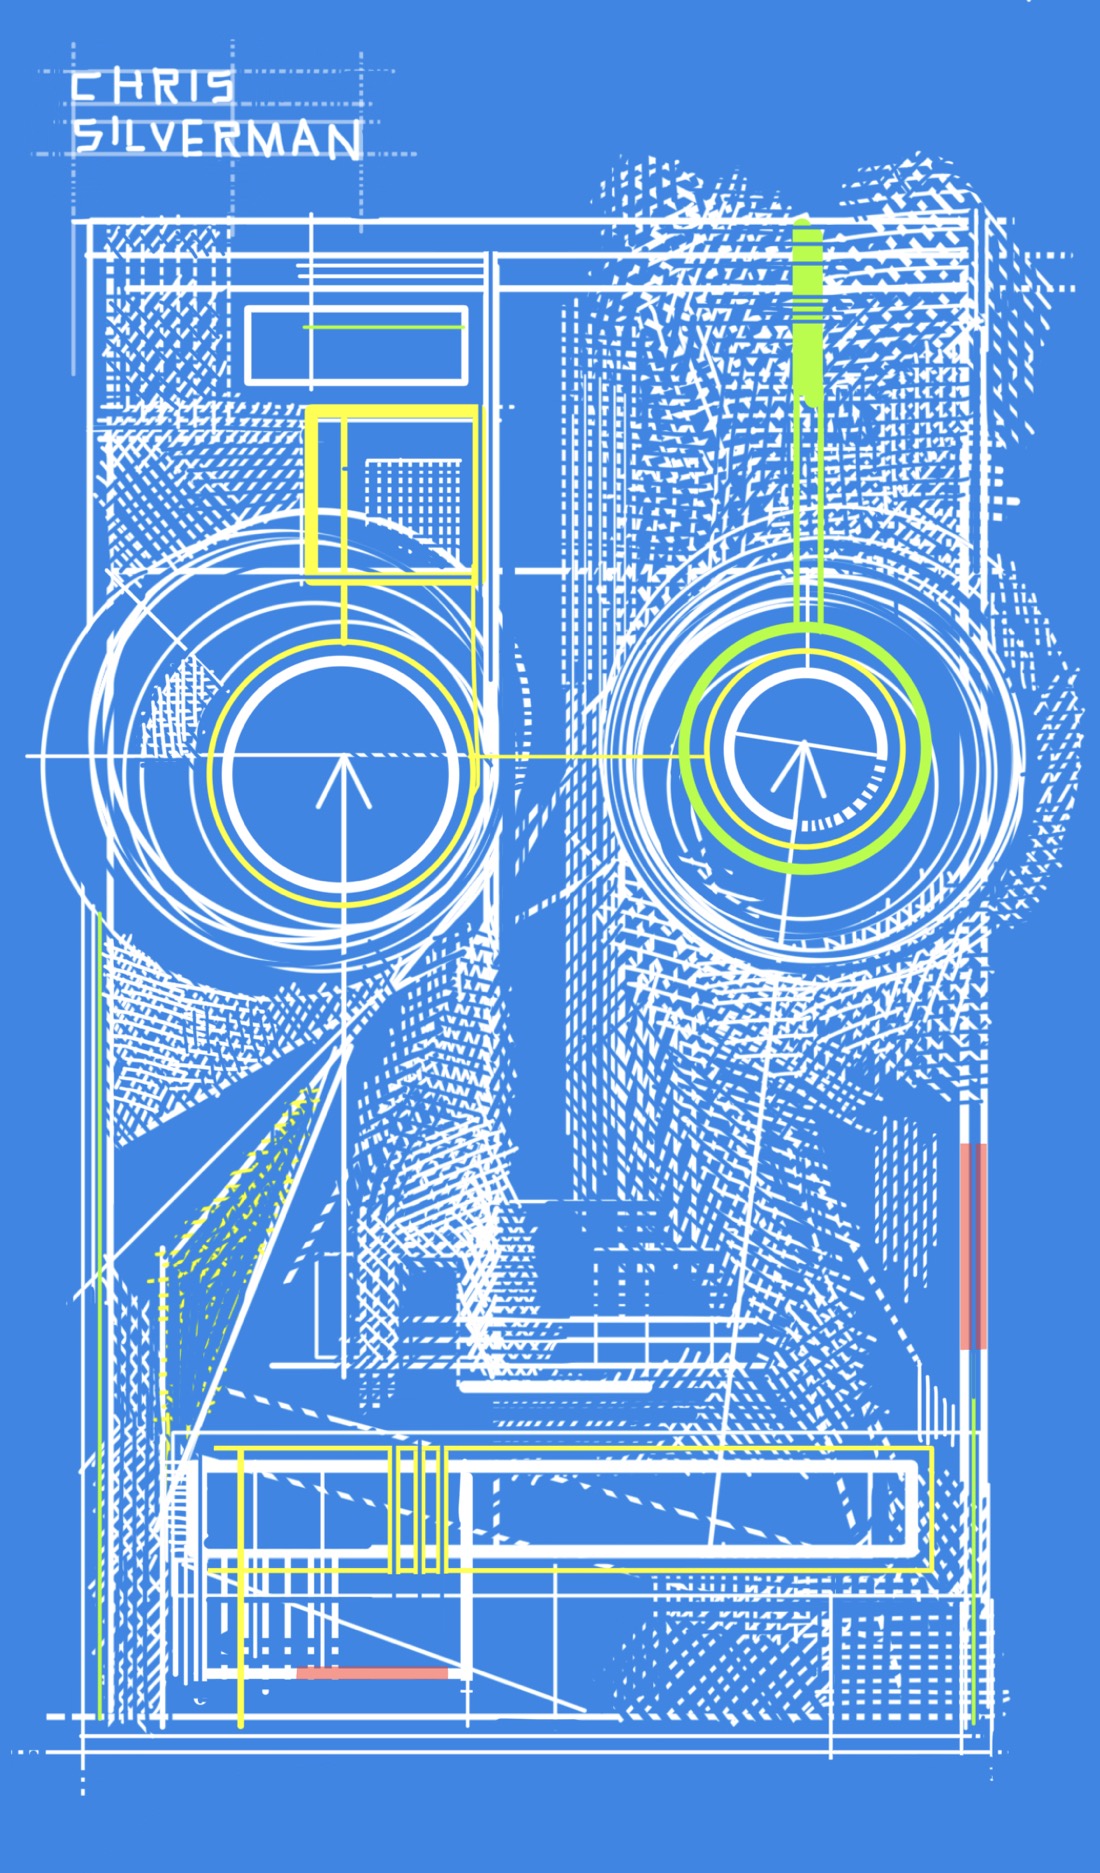 An intricate pattern of geometric shapes, lines, and textures that form a rough, robotic face. It looks like a blueprint for a mask or a microchip. The drawing is mostly white ink on a medium-blue background, with some shapes drawn in yellow, green, and a translucent highlighter pink.